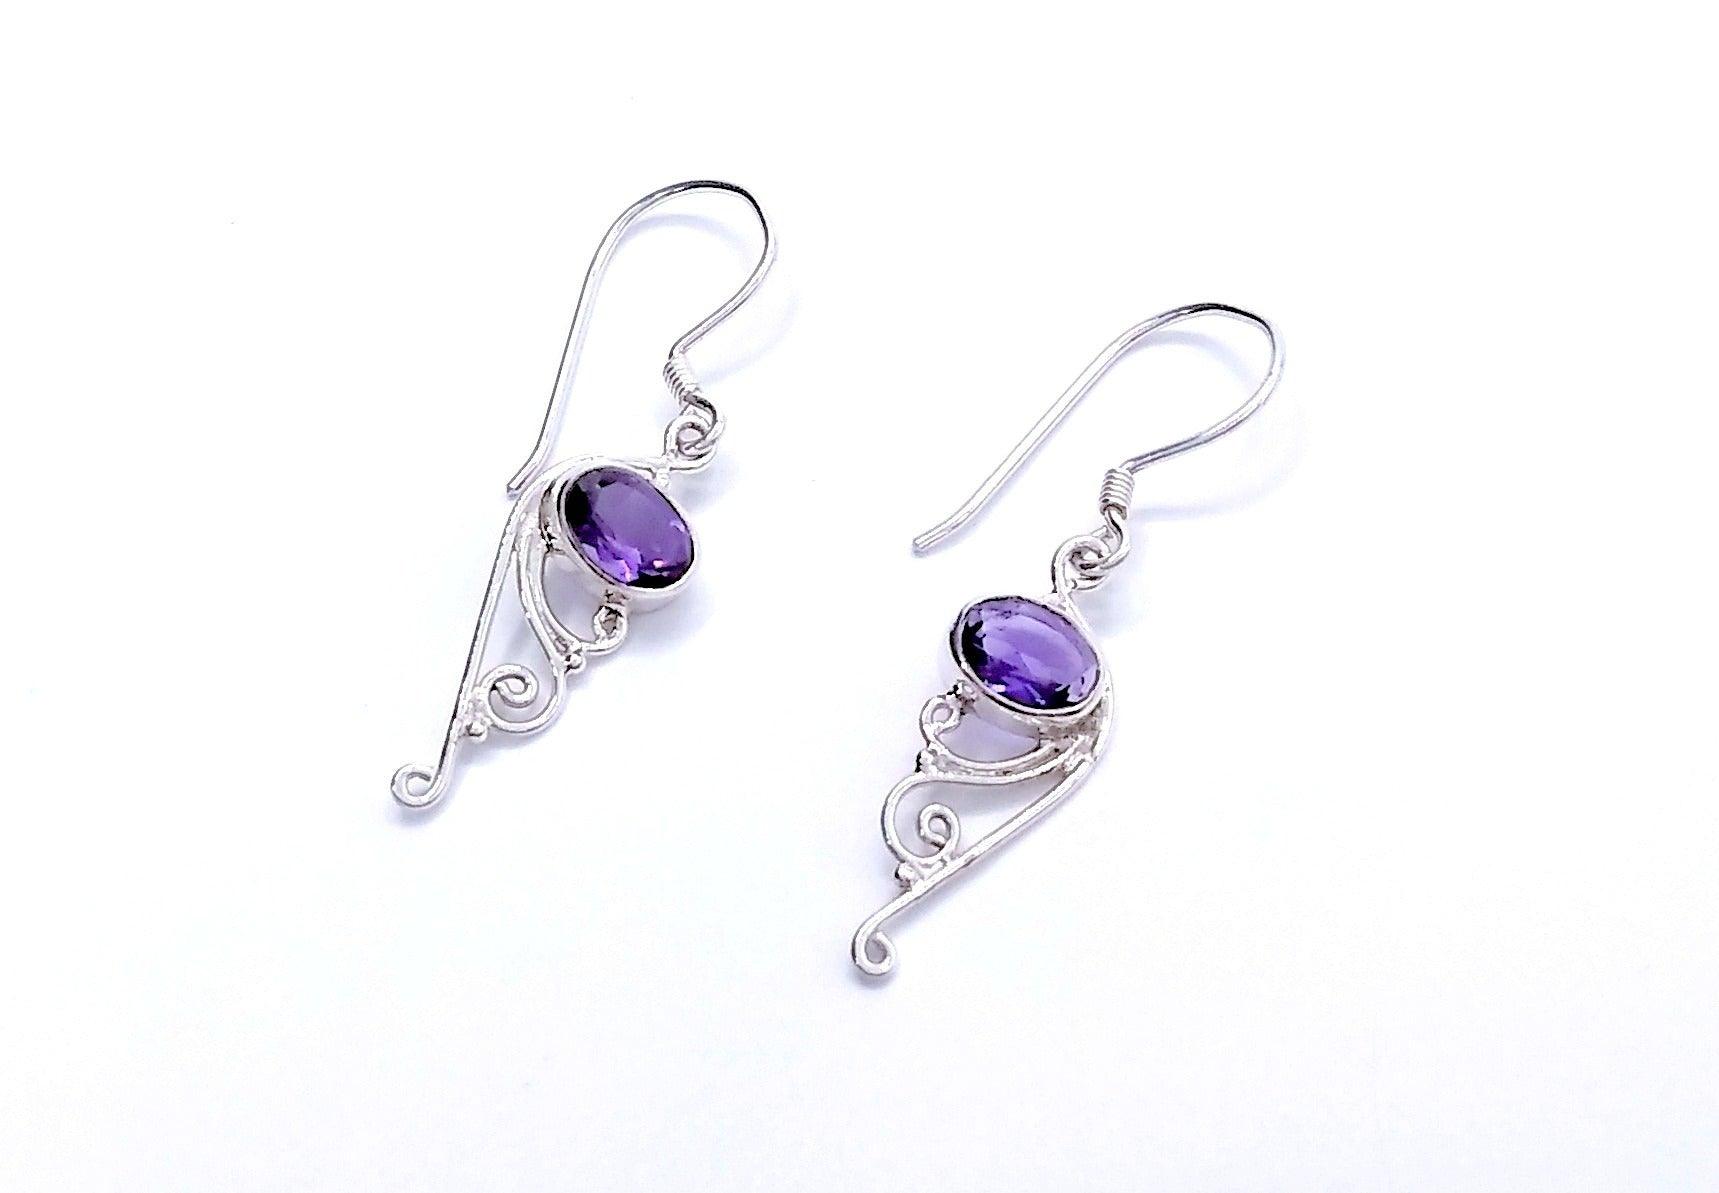 Sterling silver drop earrings on a French wire with an Amethyst stone at the top and filigree design at the bottom.